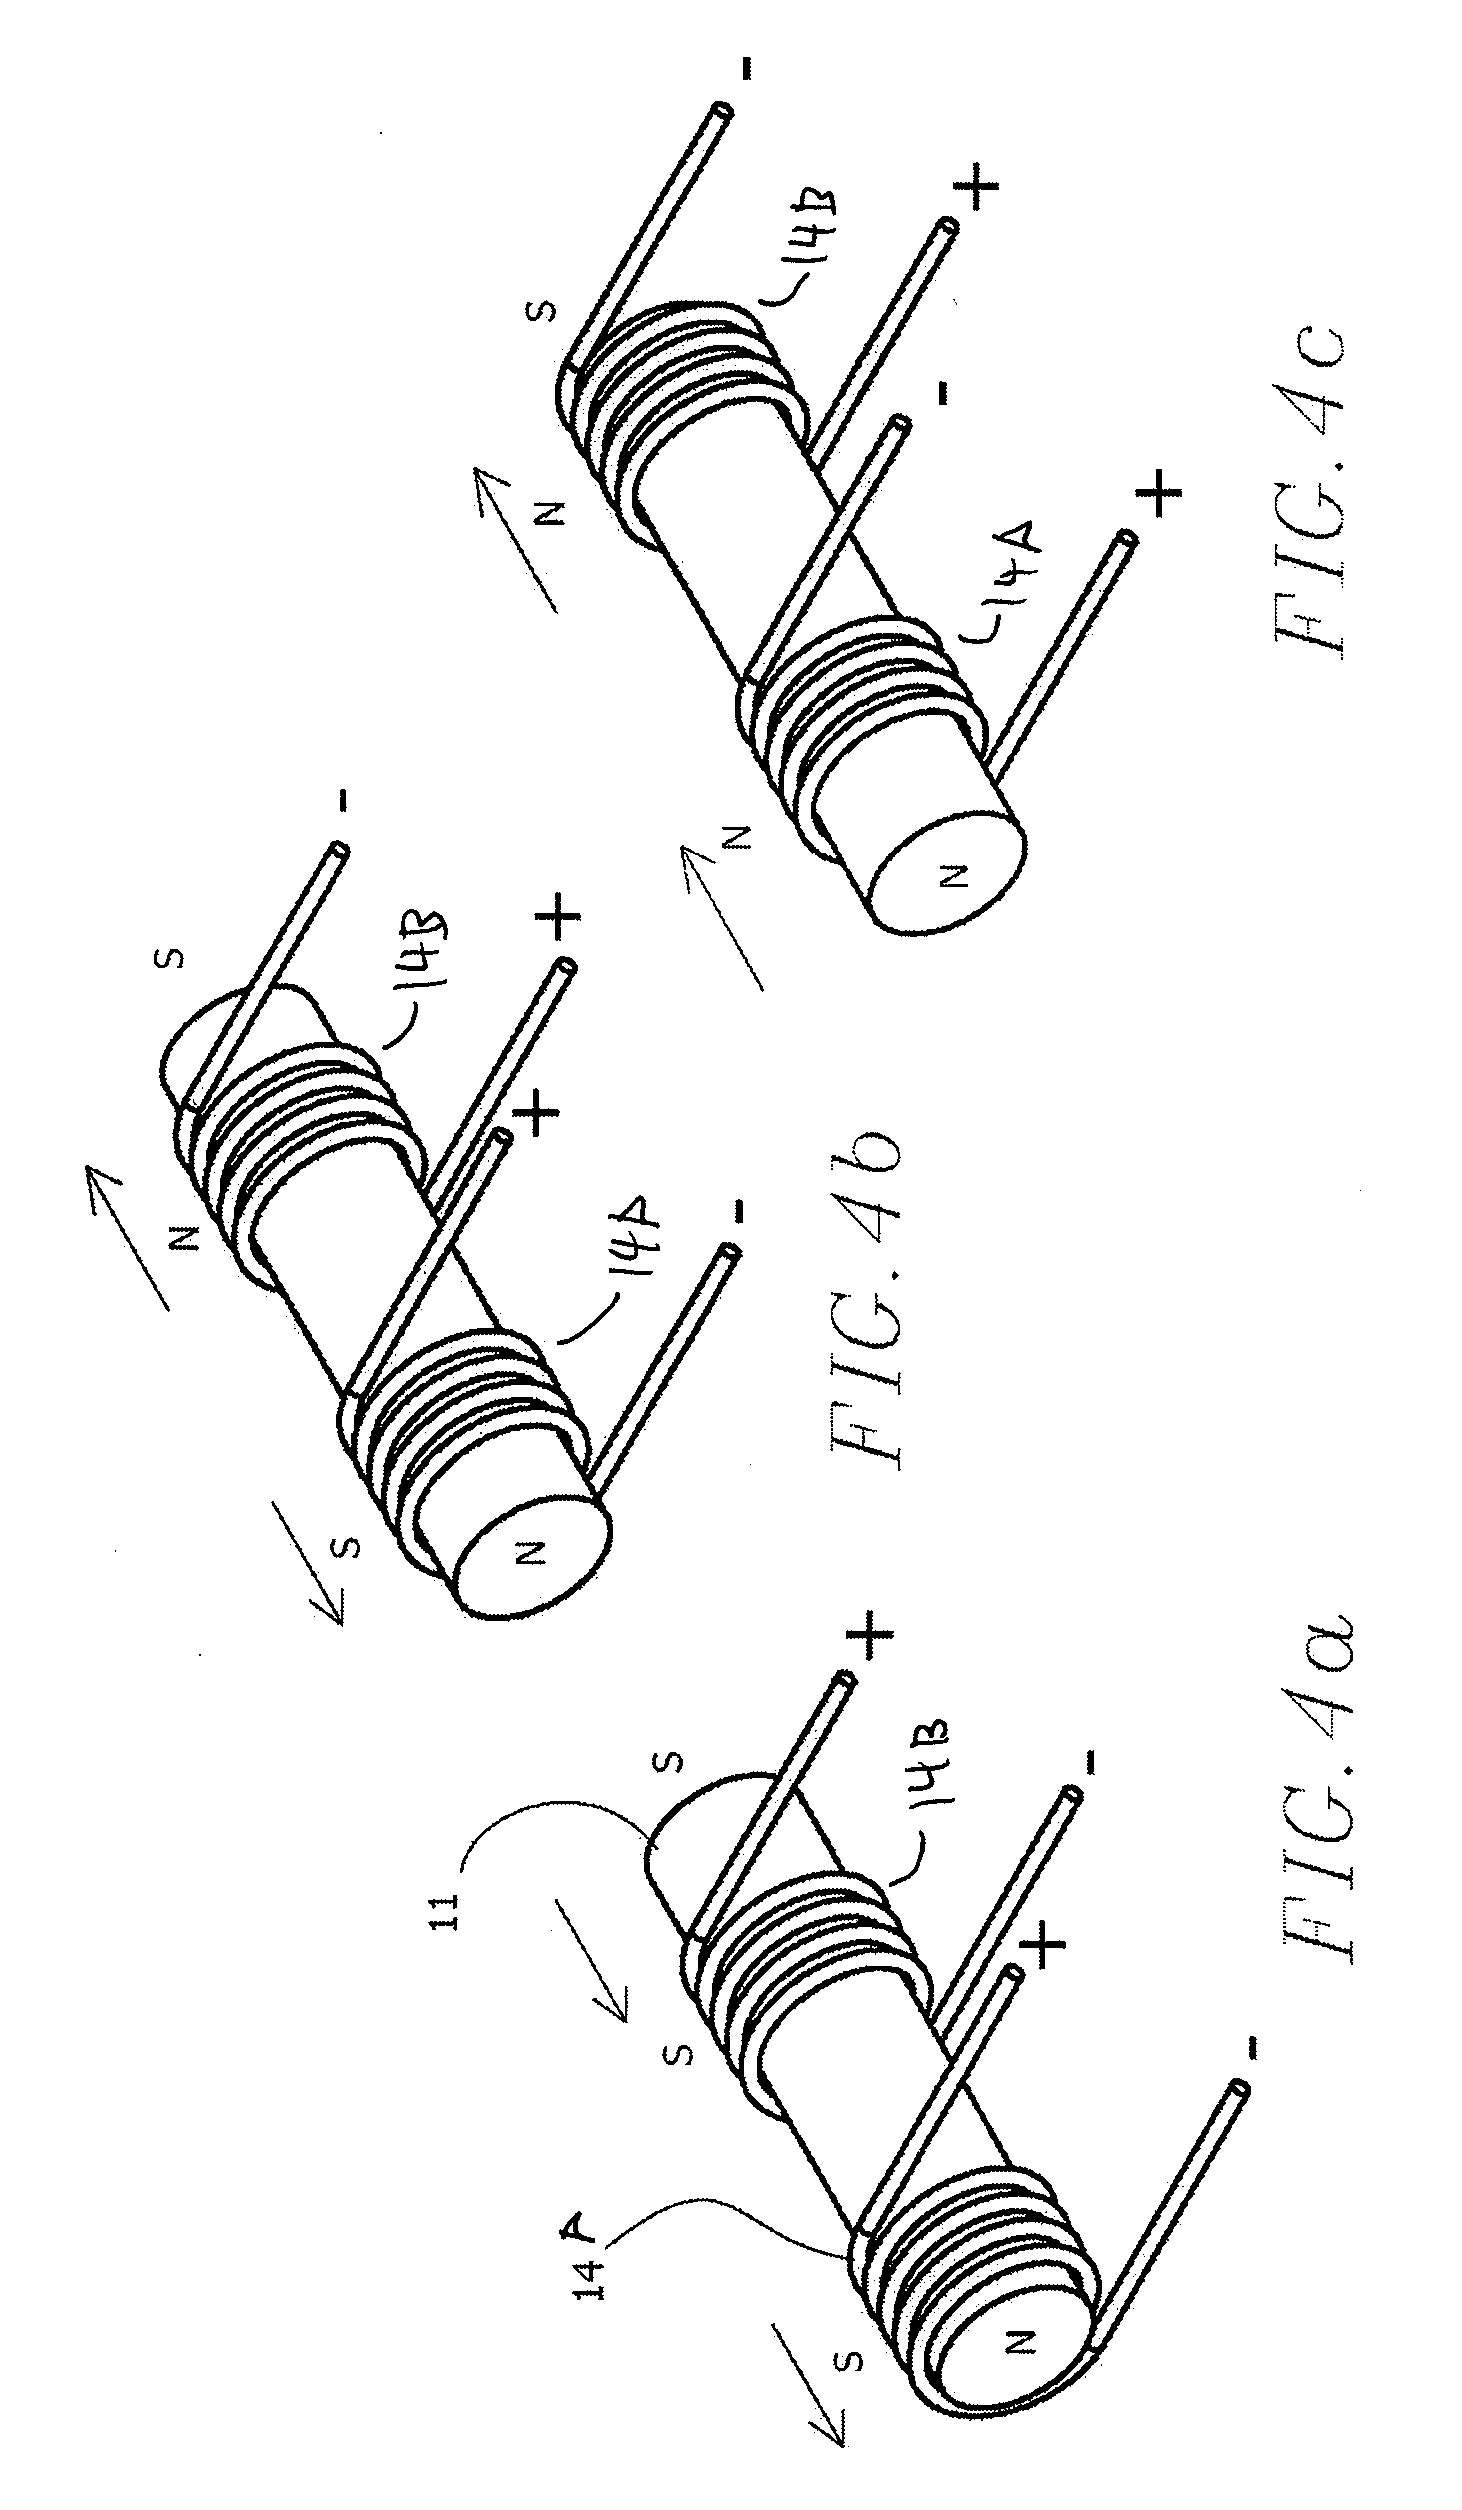 Magnetic linear actuator for deployable catheter tools